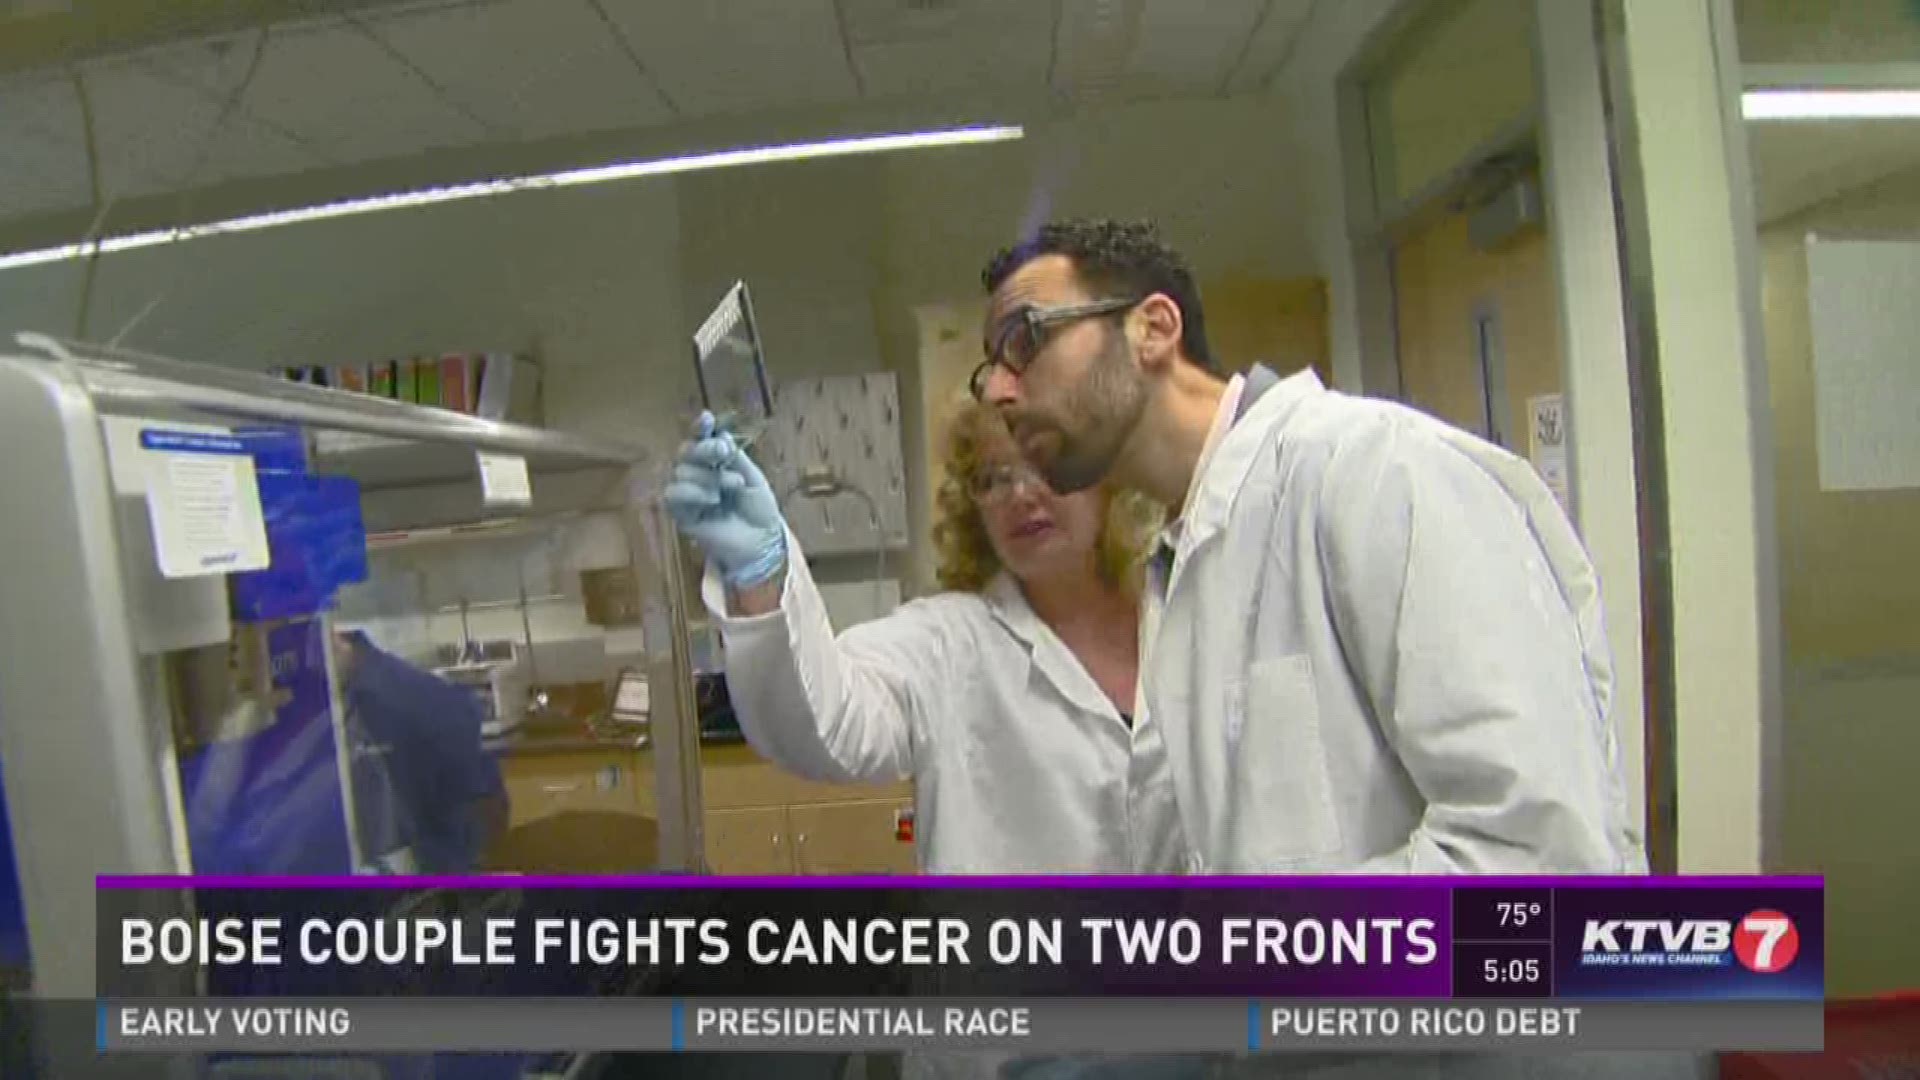 Diana Hughes is fighting breast cancer with help of researcher husband.